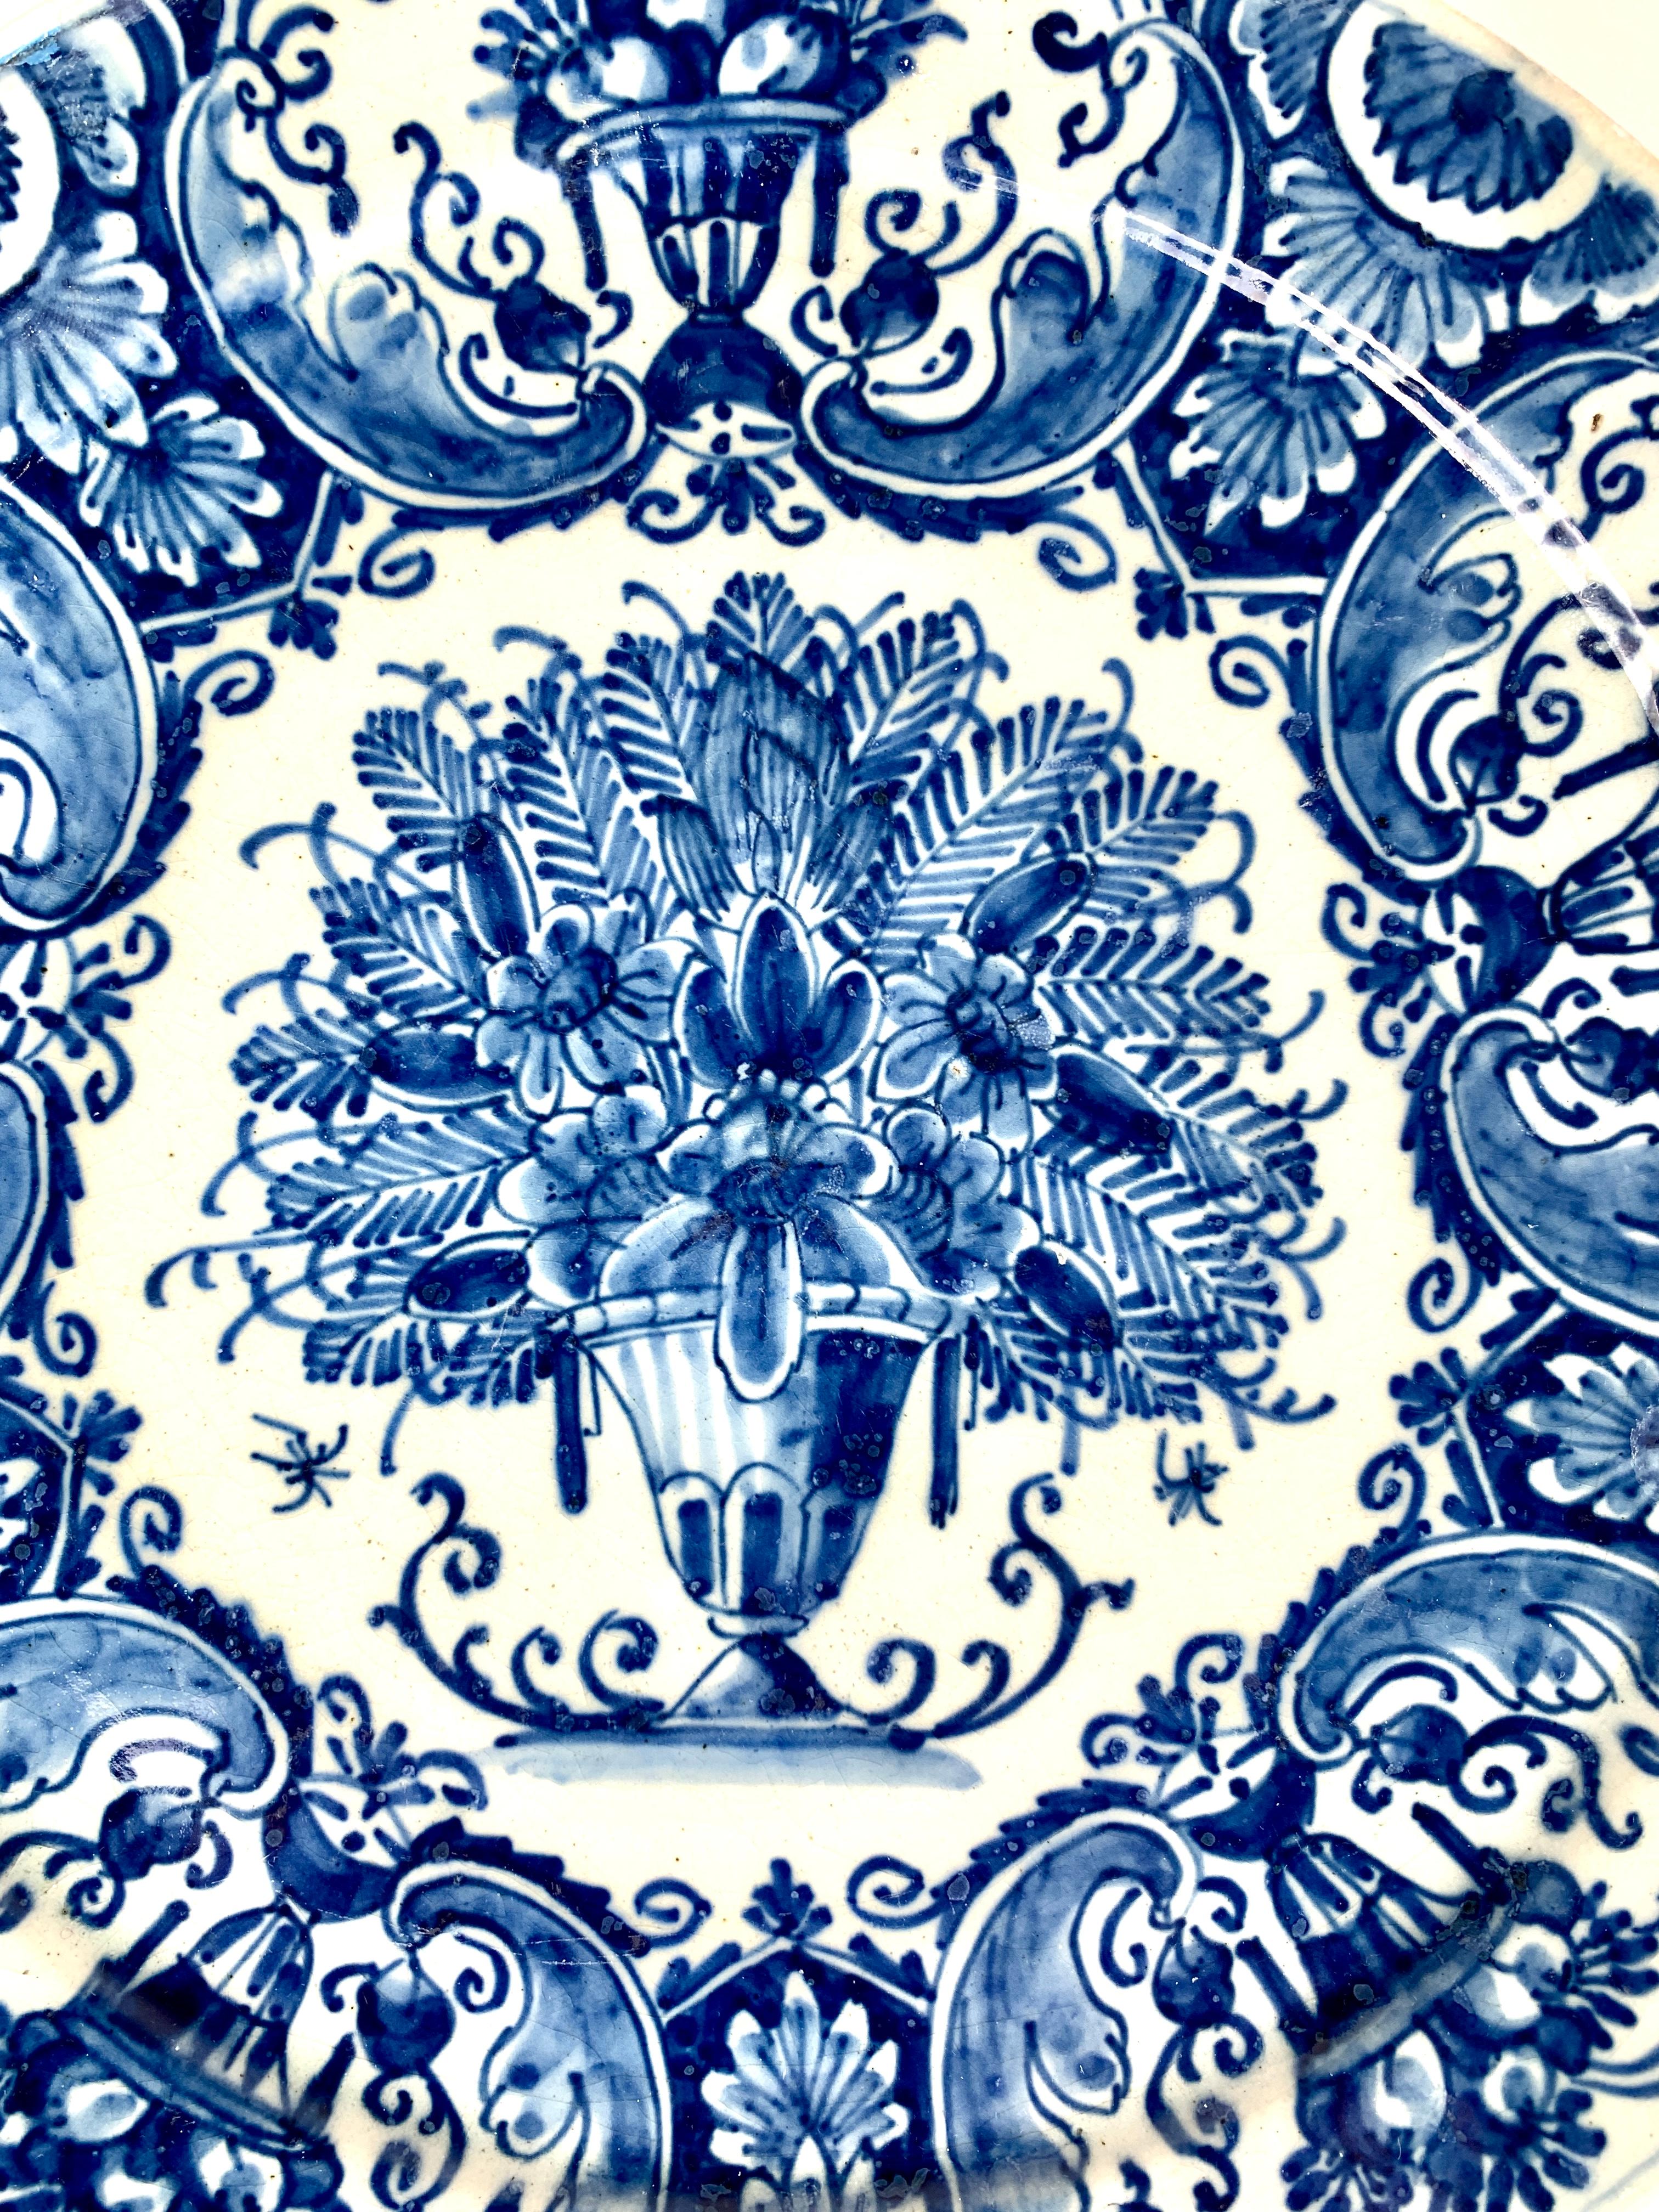 Rococo 4 Large Blue and White Dutch Delft Plates Hand Painted, 18th Century, Circa 1770